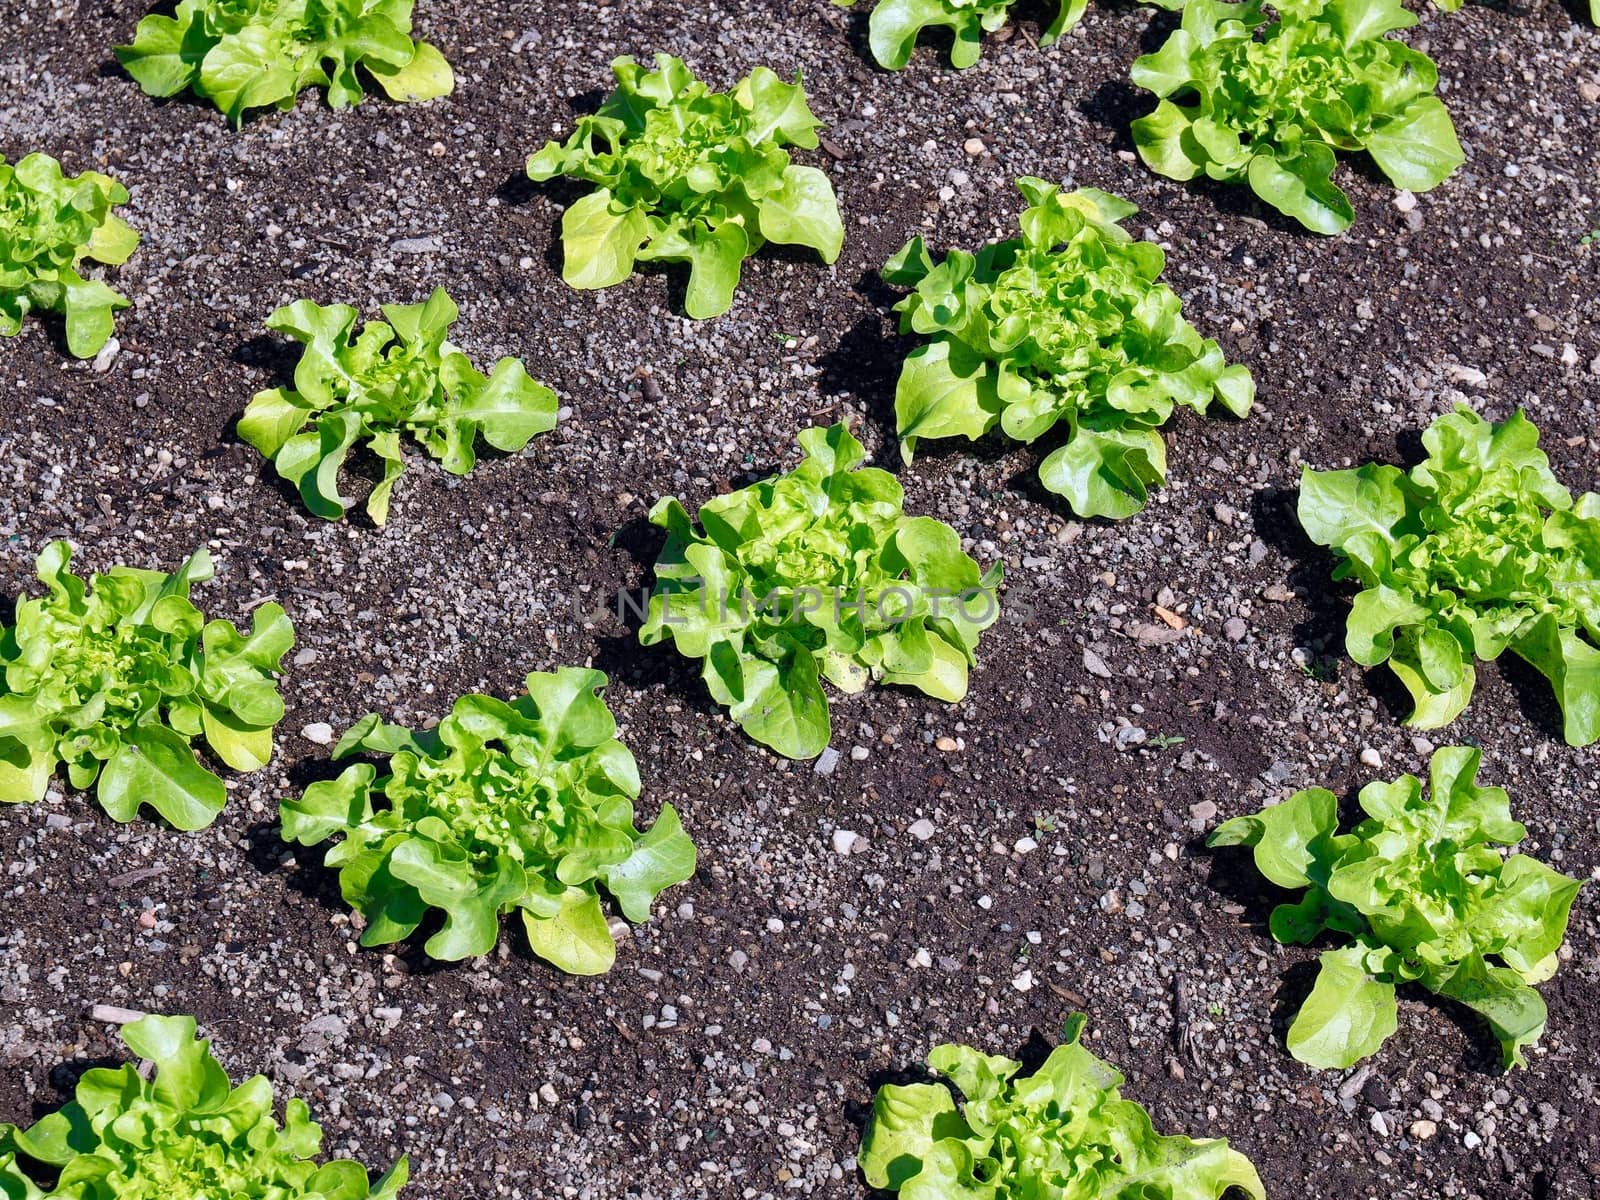 Young green salad plants growing in a field